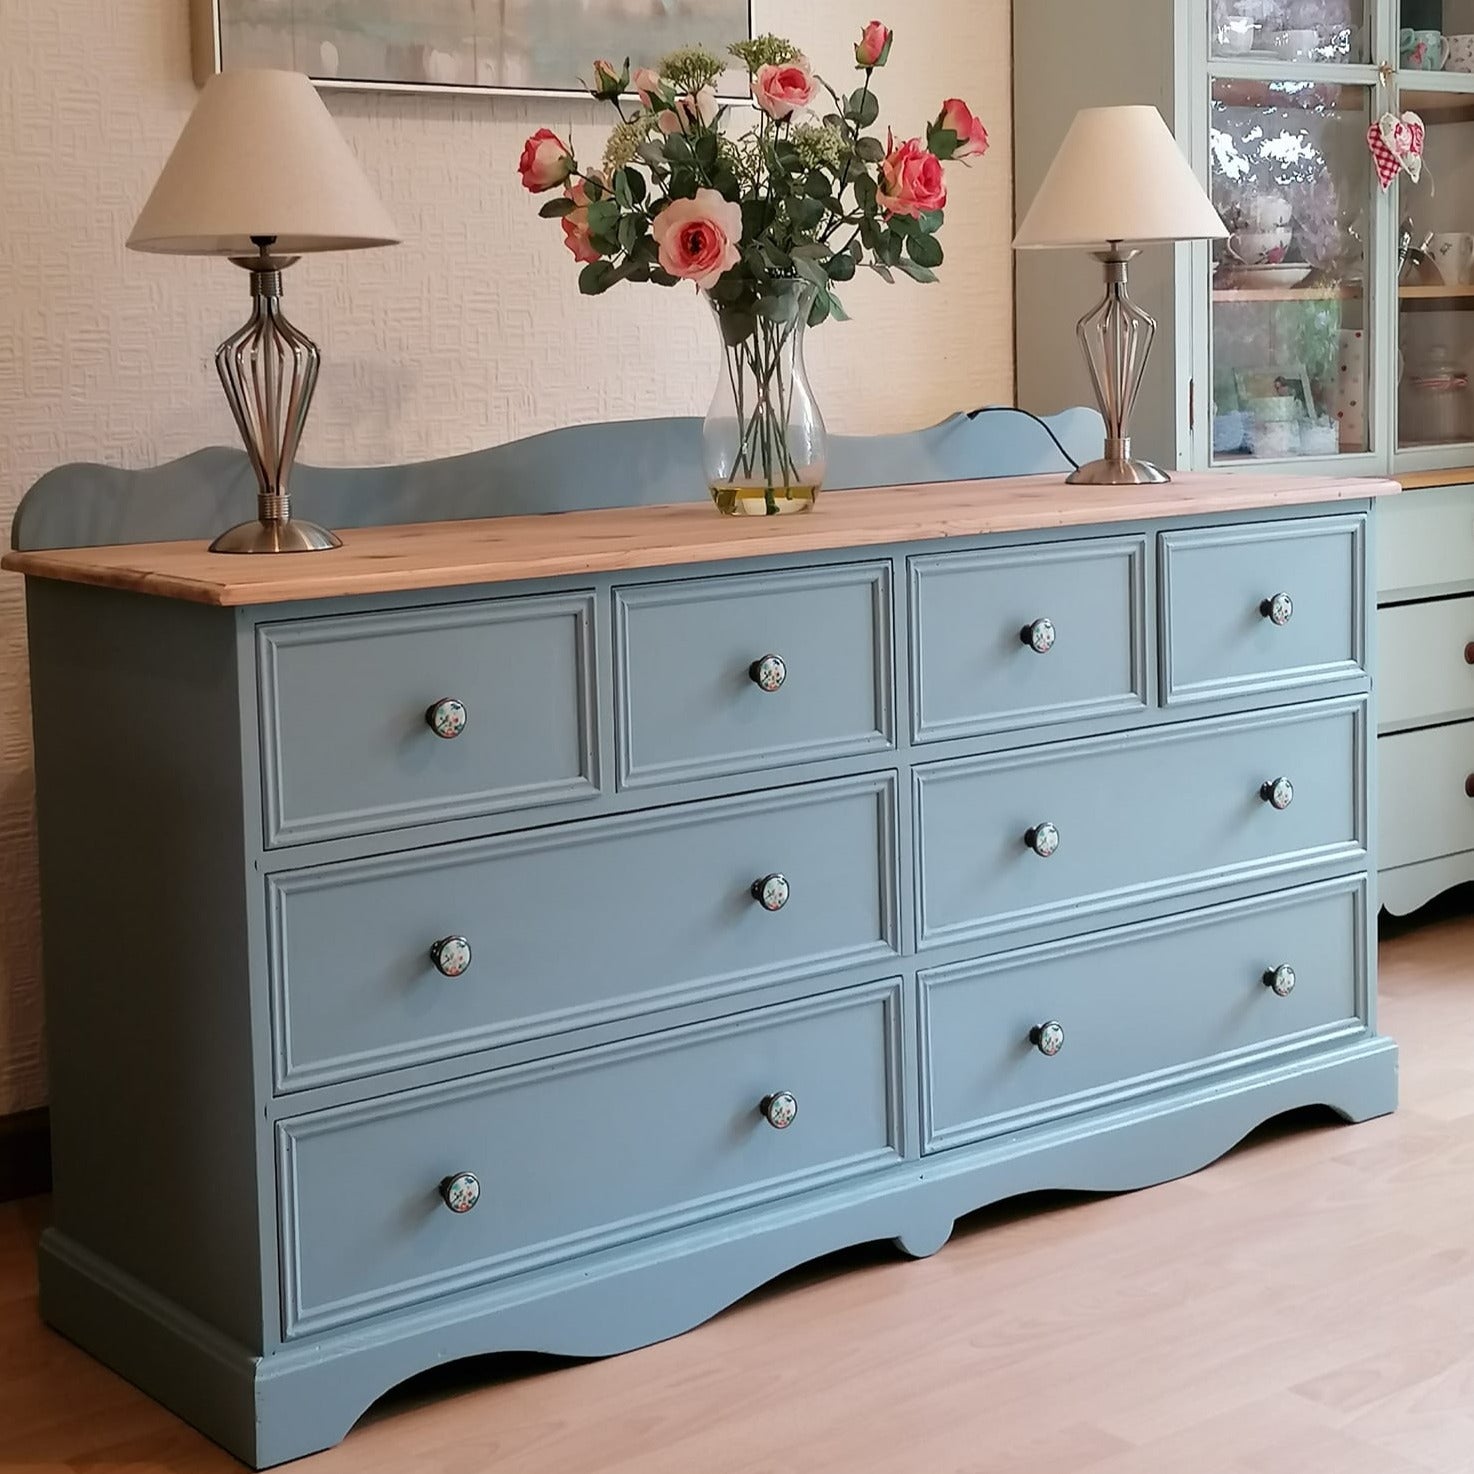 Frenchic Paint | Lazy Range - Scotch Mist by Weirs of Baggot St